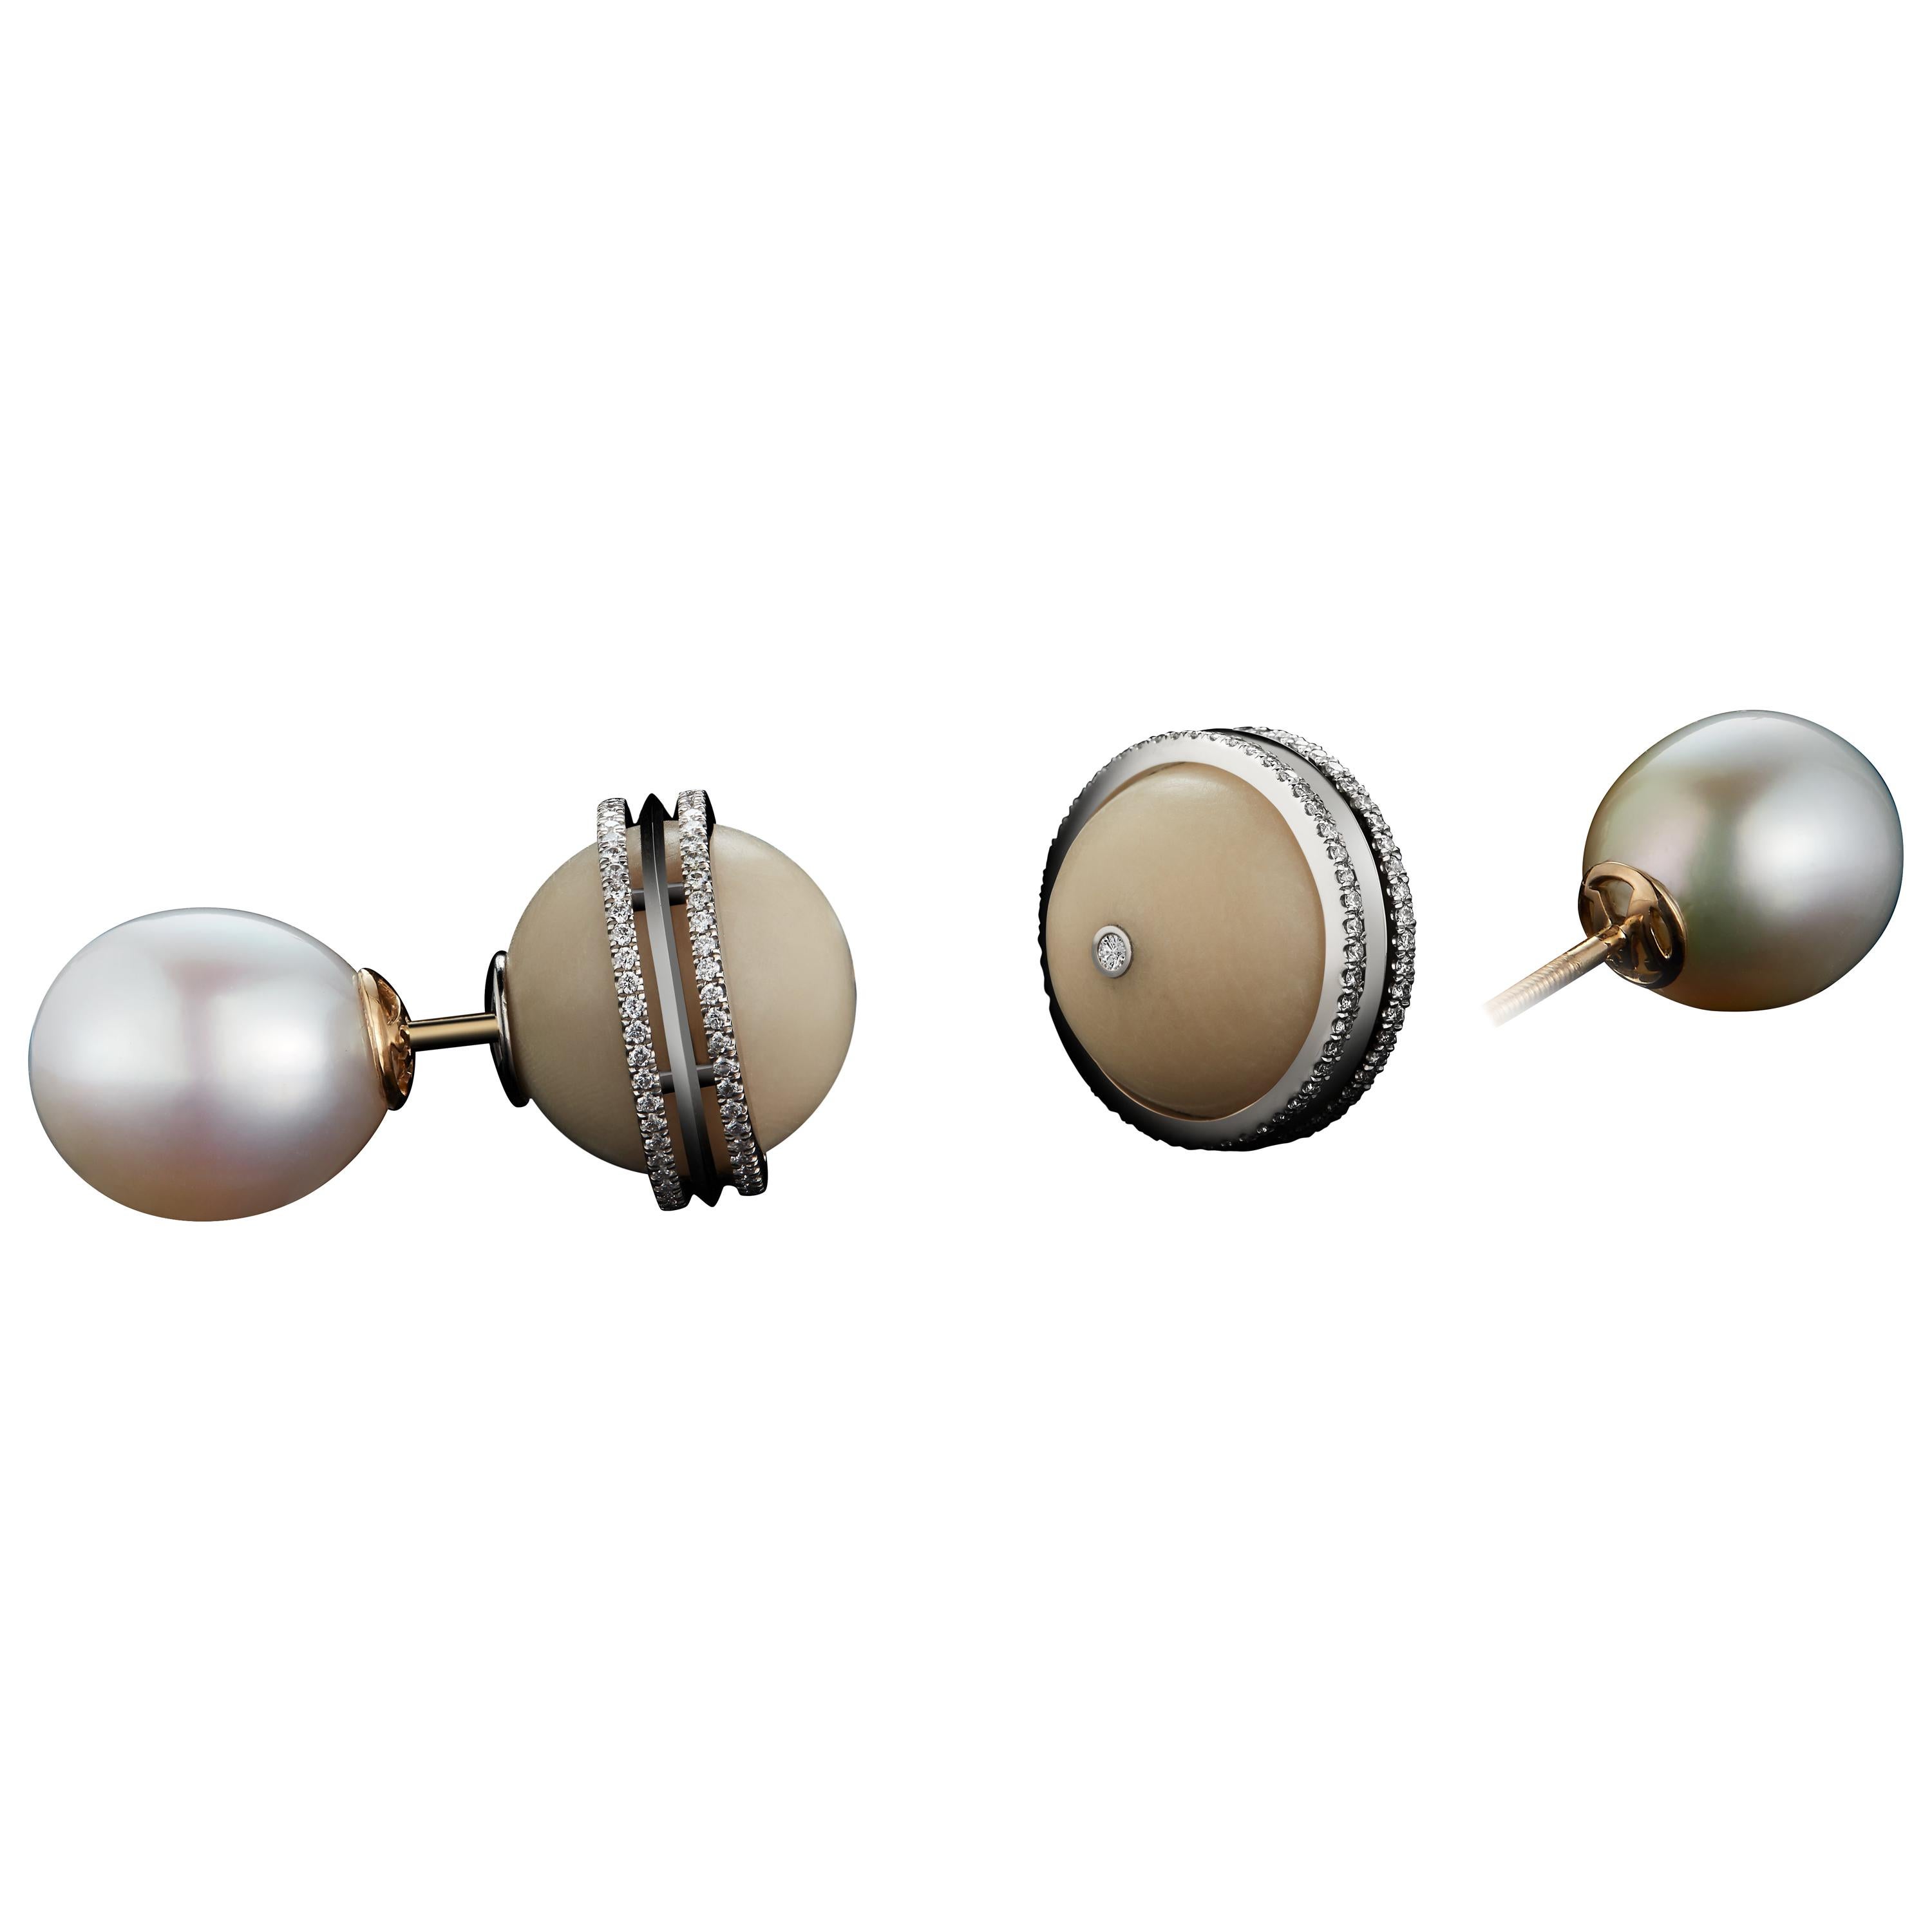 Alexandra Mor Double Sided Tribal Studs with South Sea Pearls and Tagua Seed For Sale